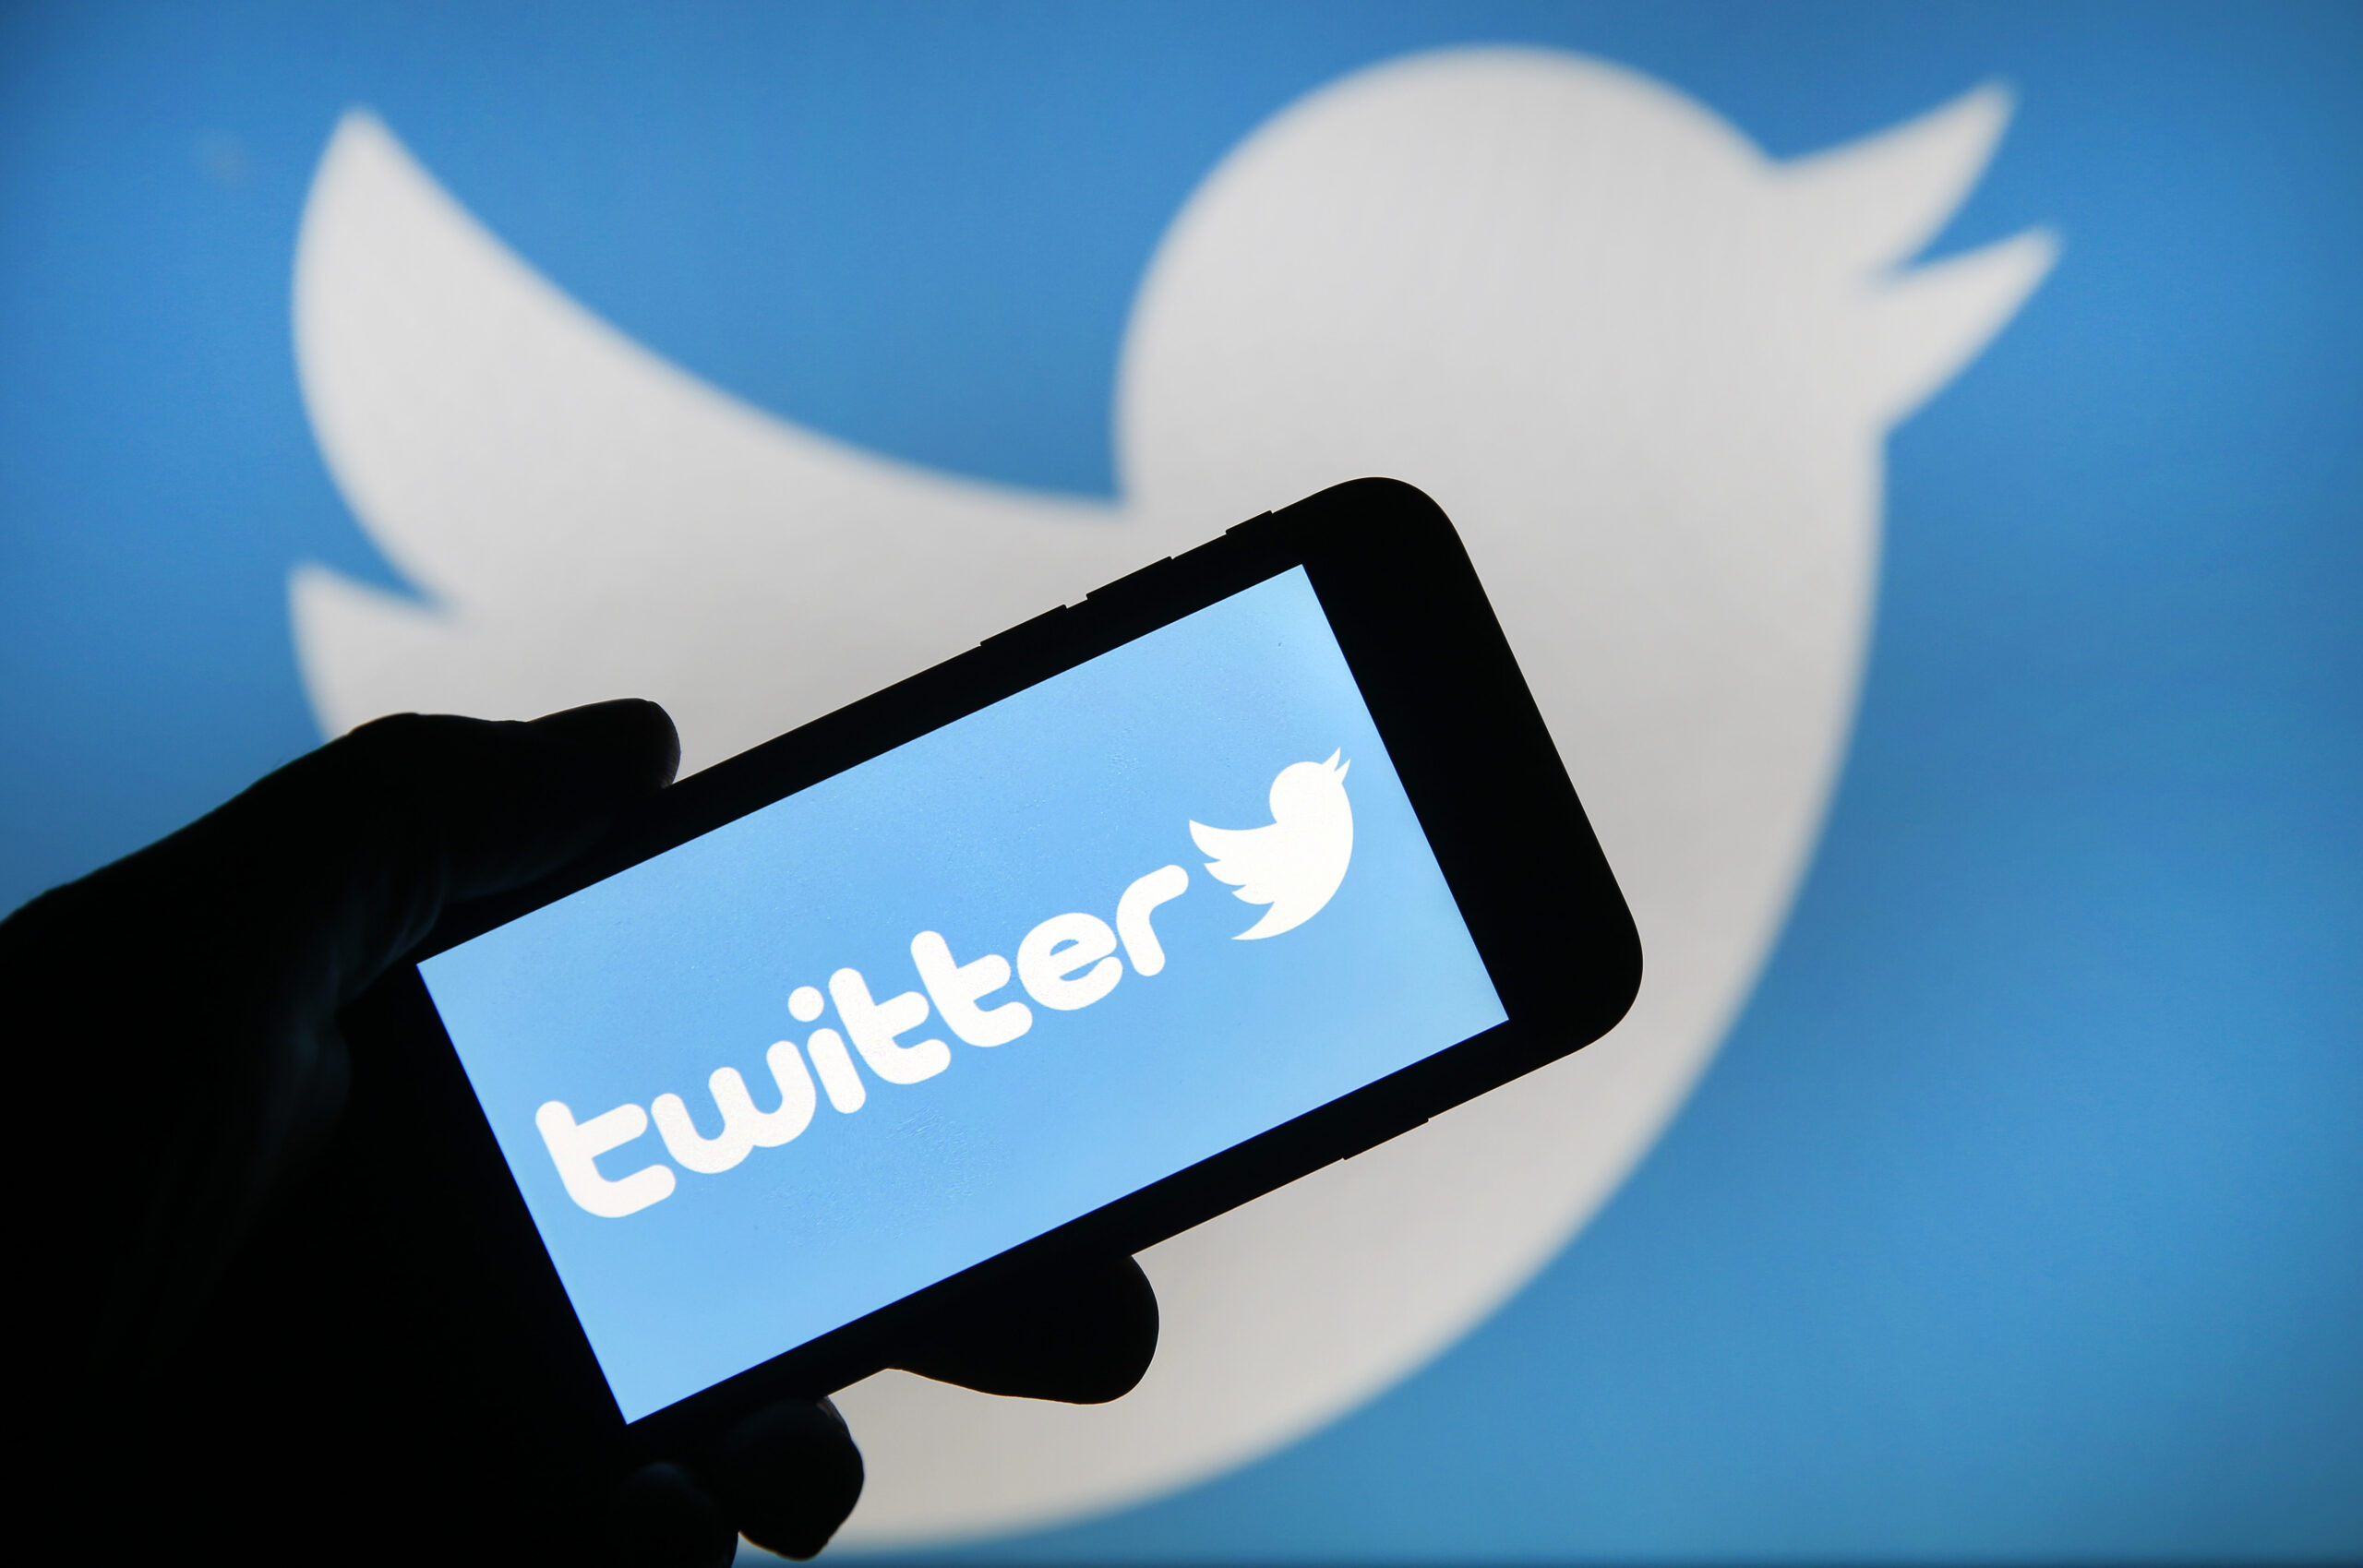 Is Your Twitter Account Acting Up? No, It’s Not You